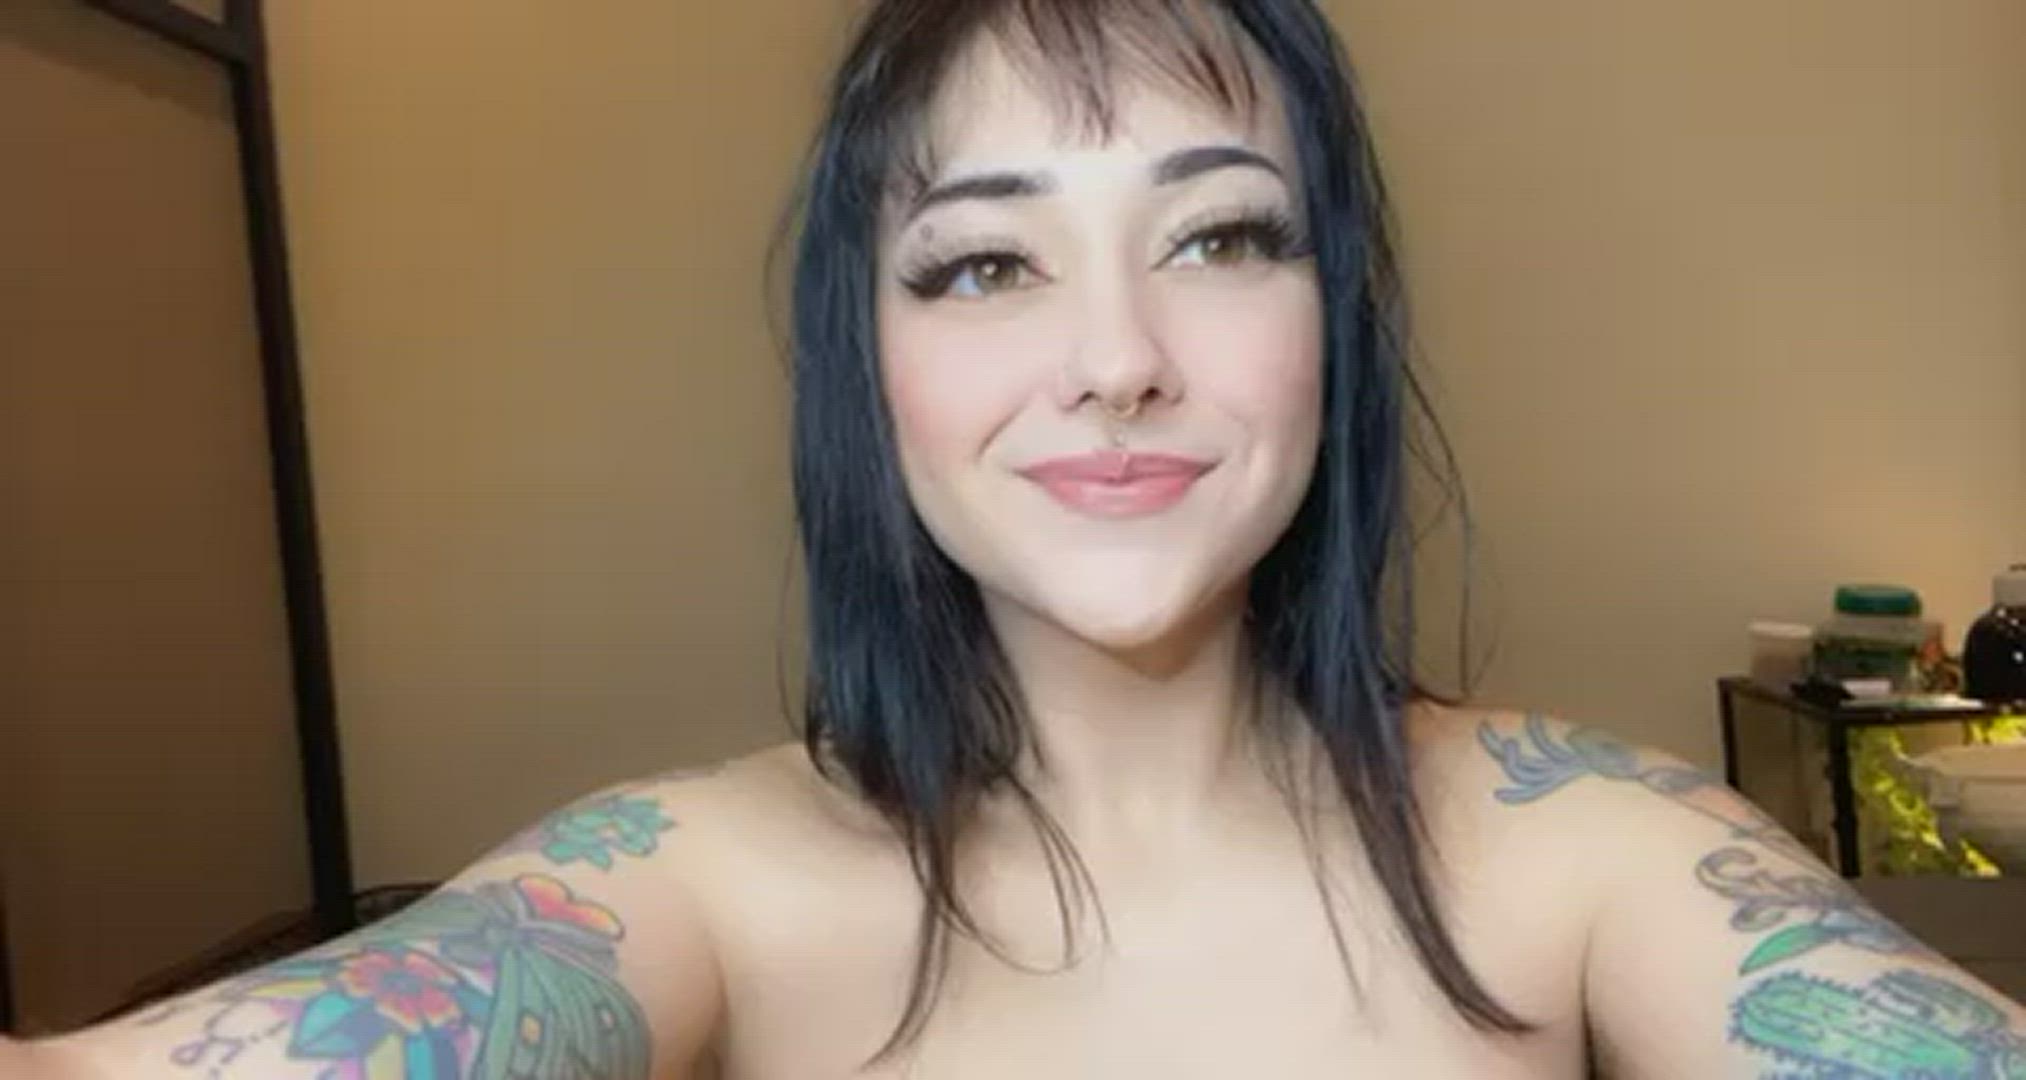 Tits porn video with onlyfans model EmyBearr <strong>@emybearr</strong>